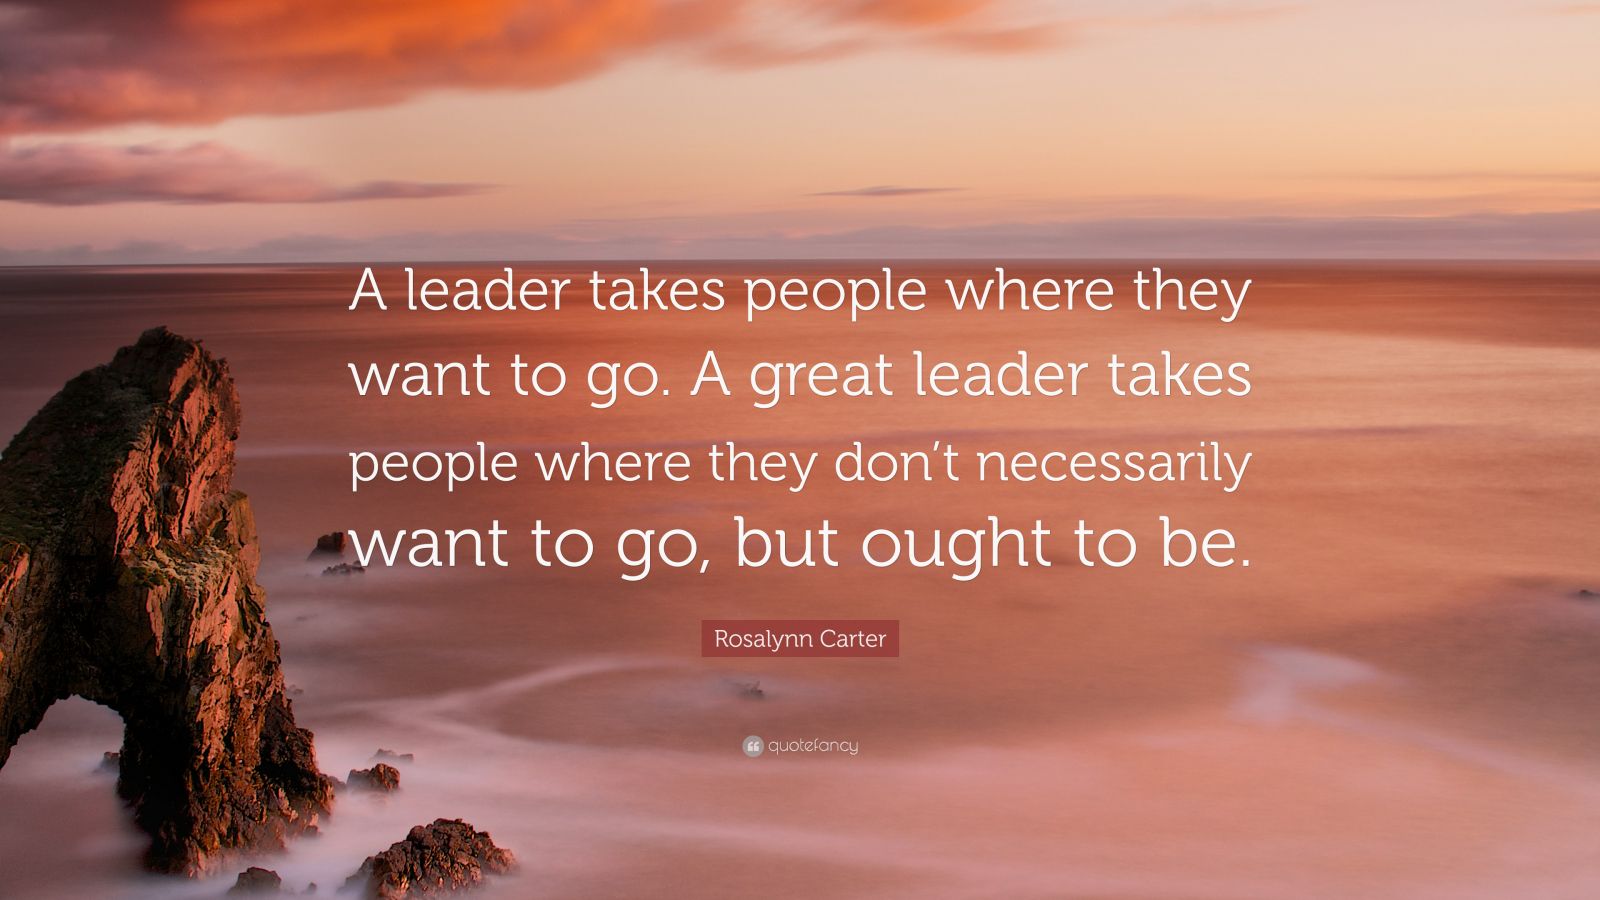 rosalynn-carter-quote-a-leader-takes-people-where-they-want-to-go-a